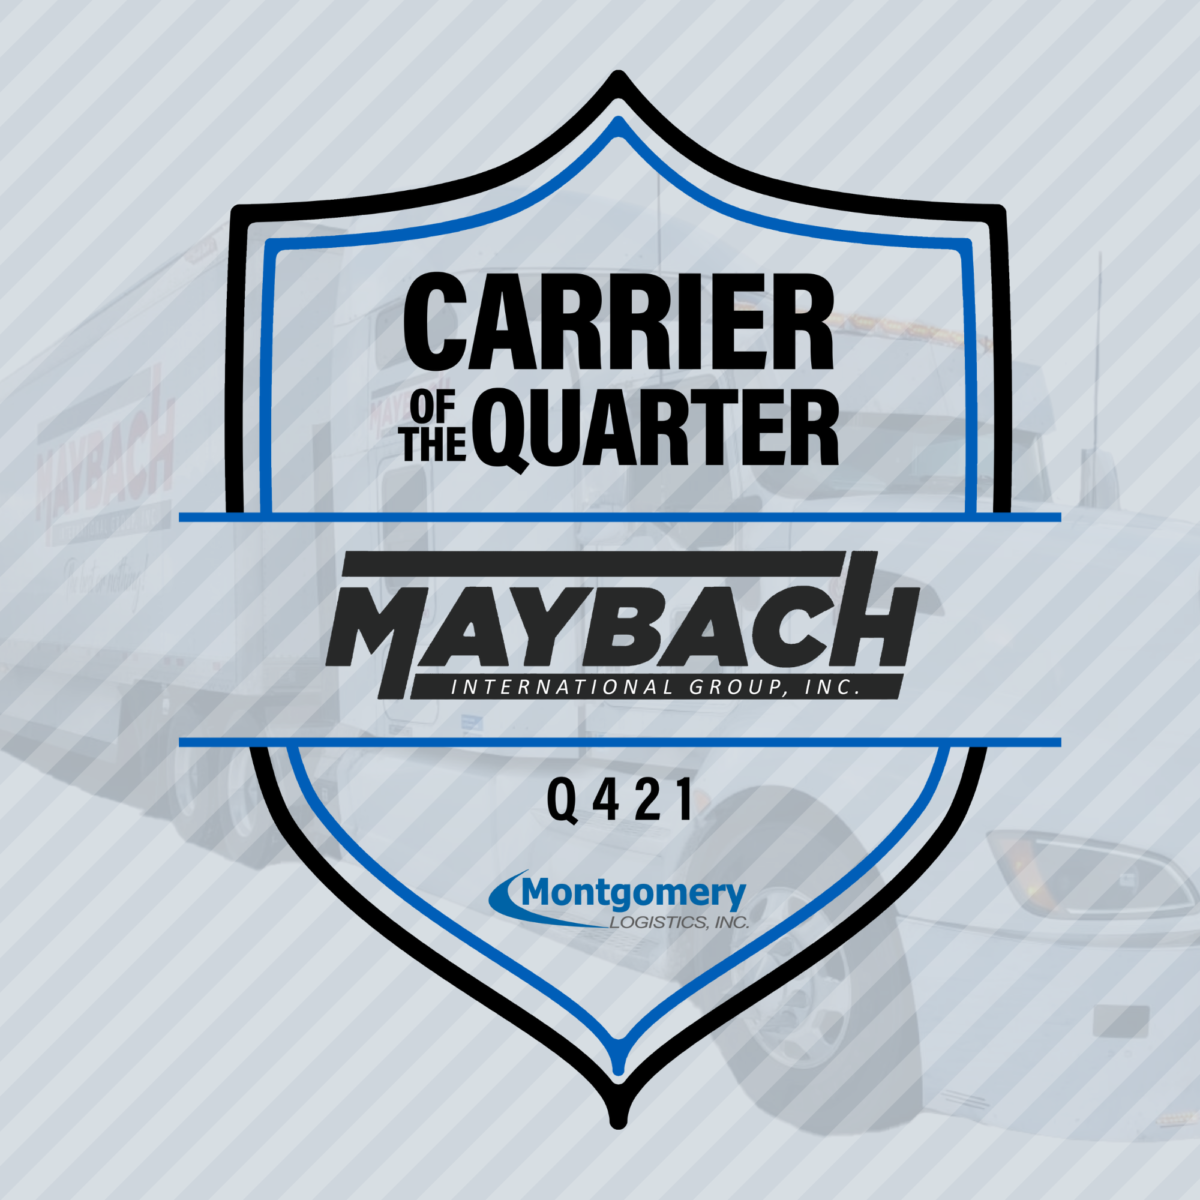 4Q21 Carrier of the Quarter Announced